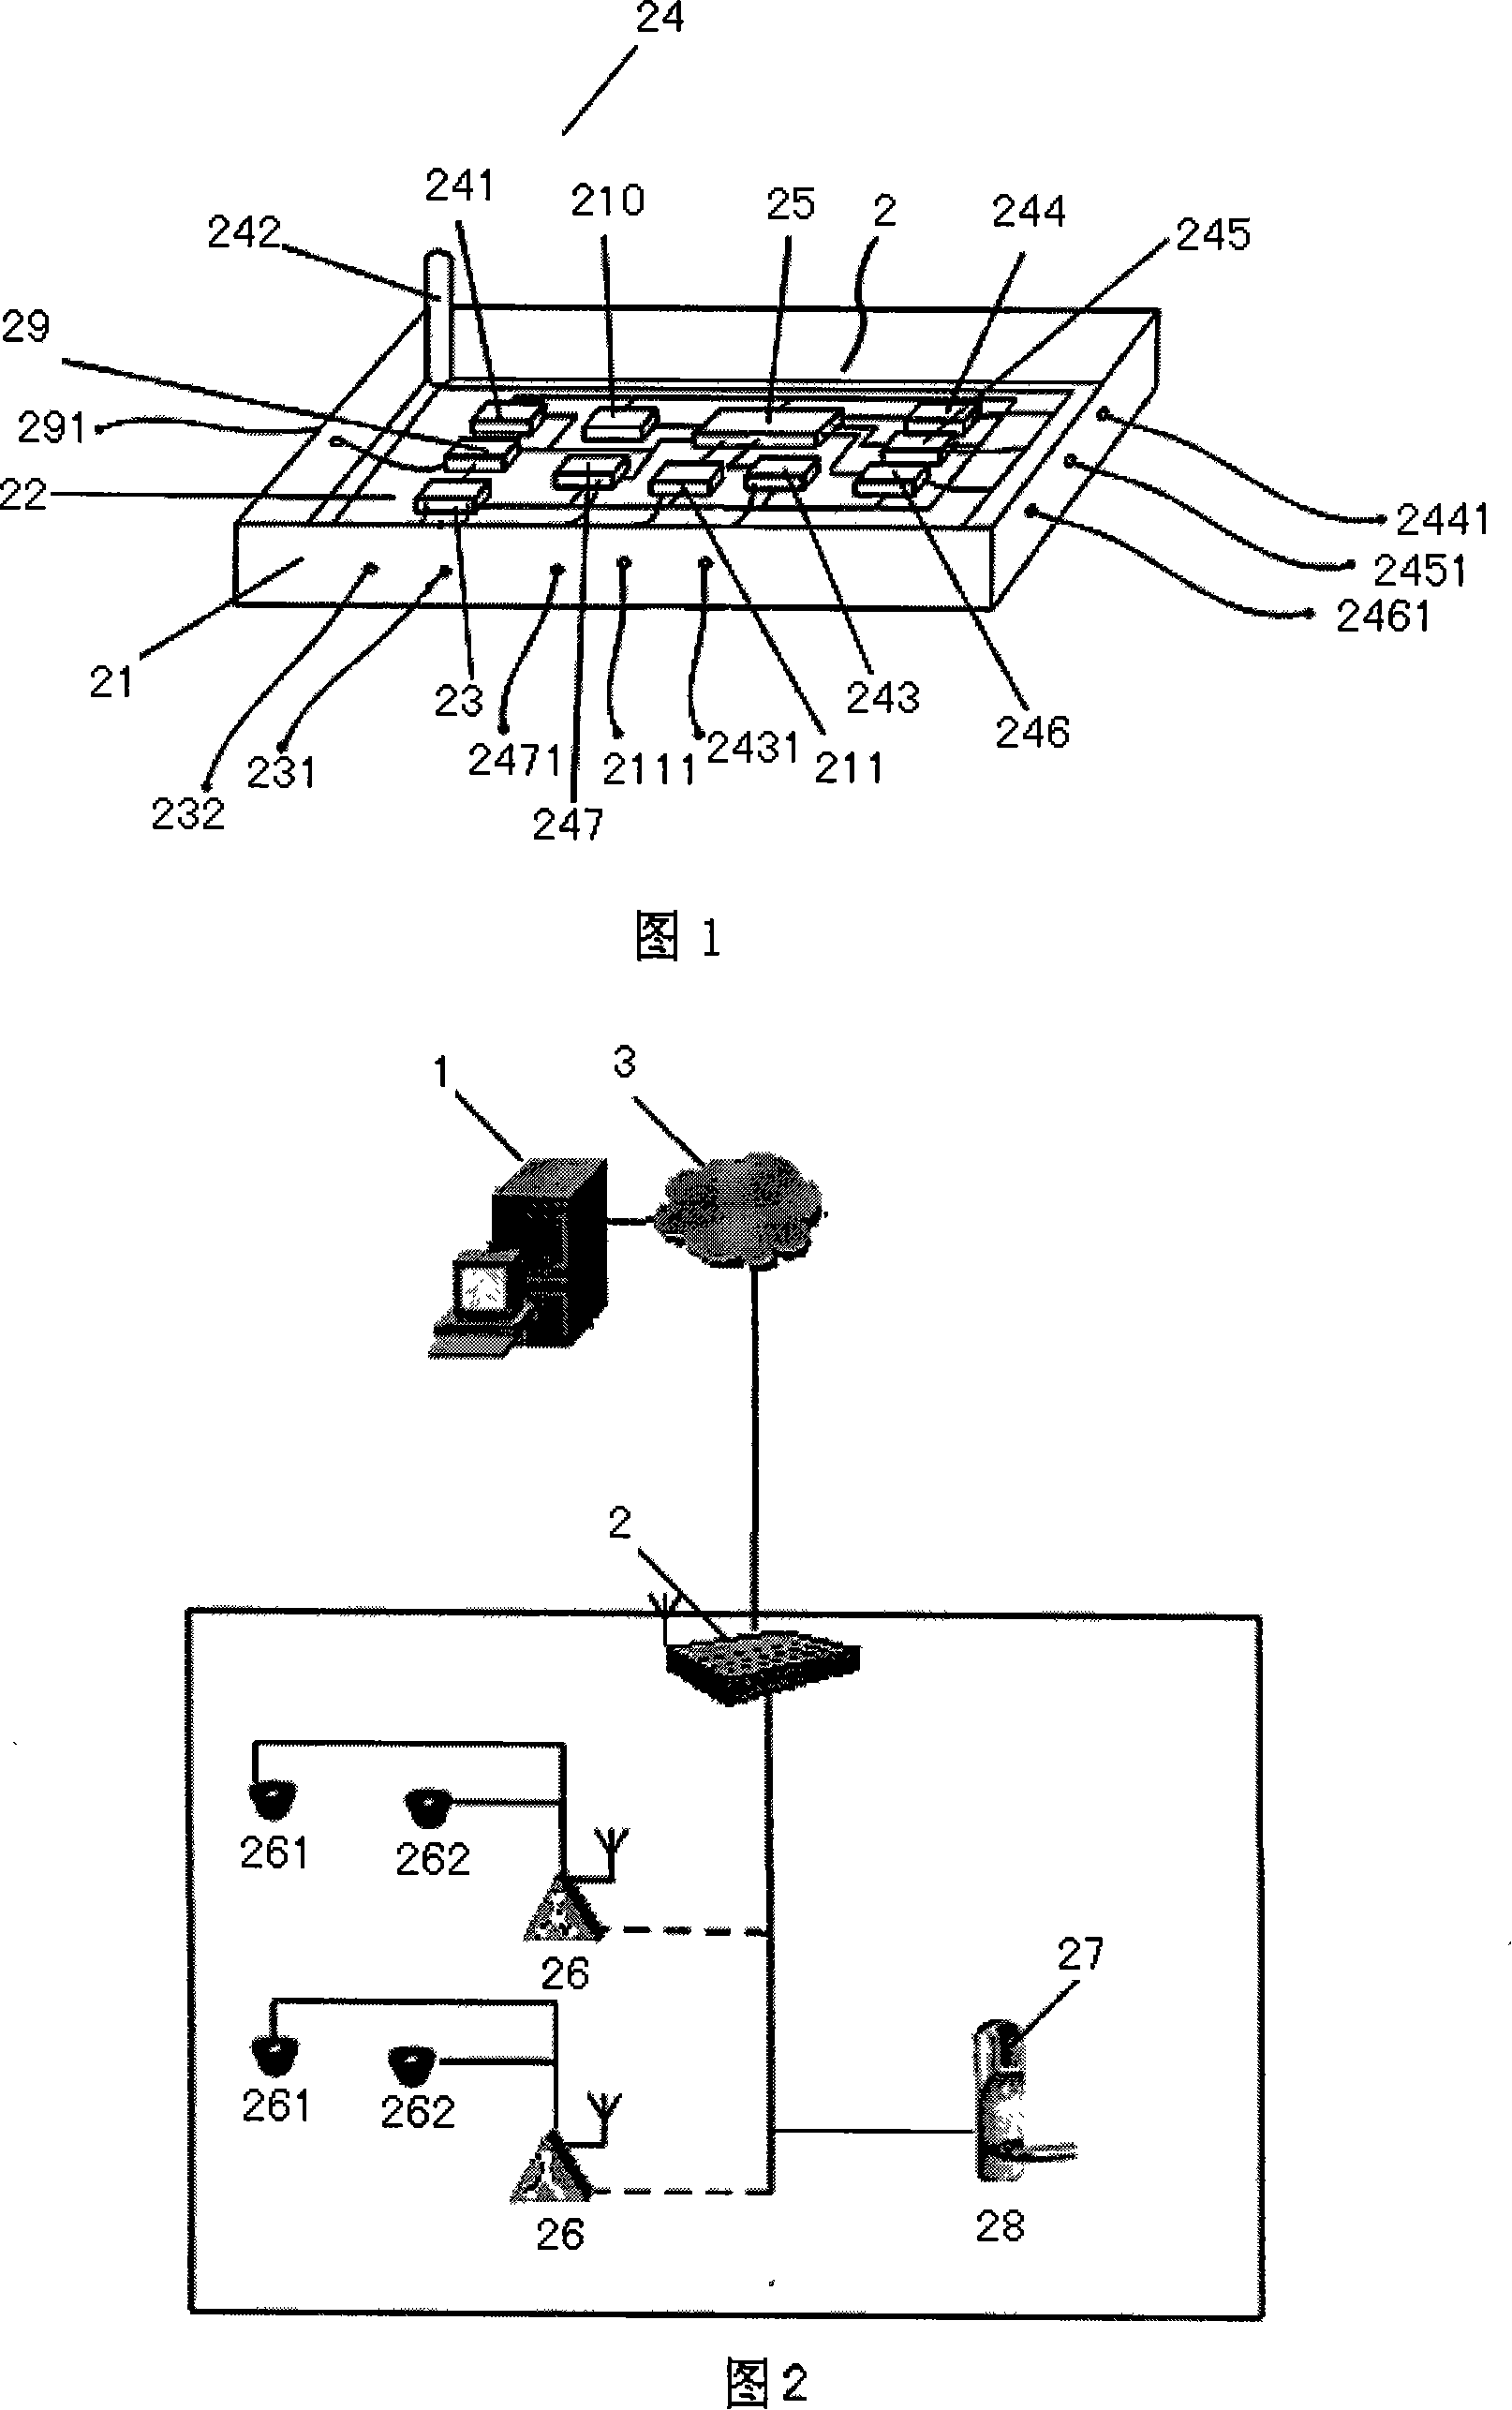 Anti-theft alarming control host controlled by centralized processing platform through wide band and method of use thereof